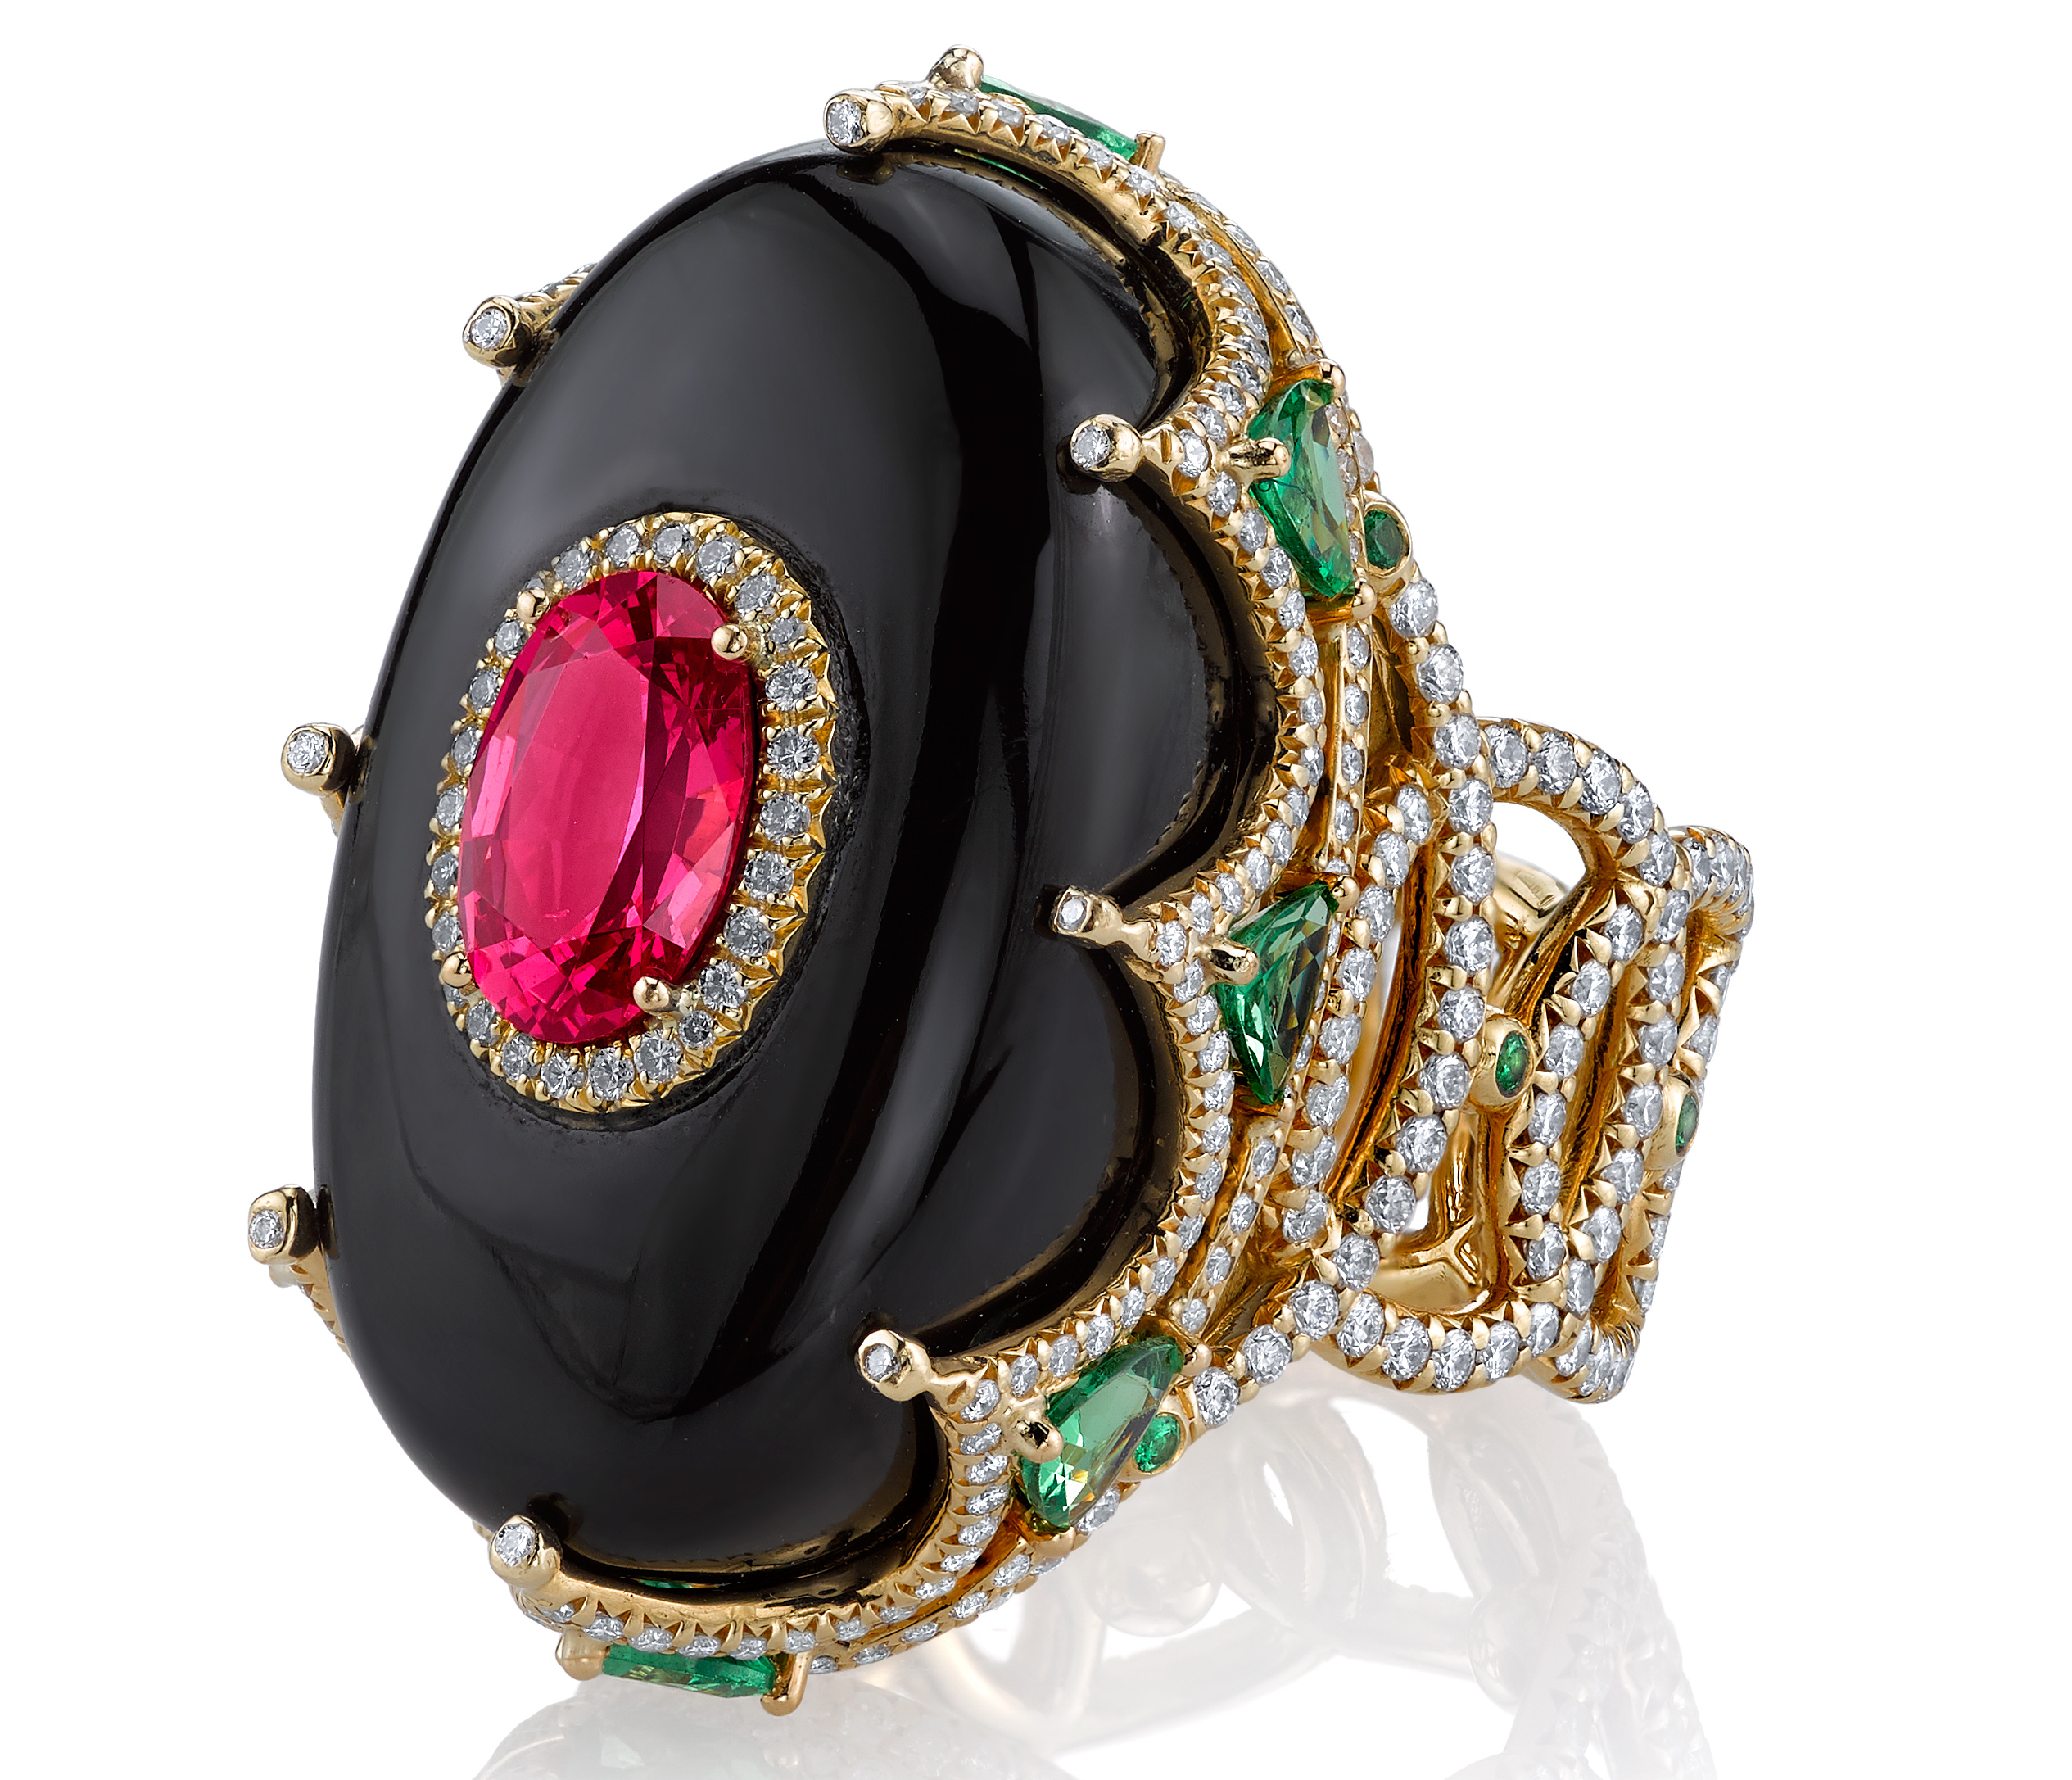 Erica Courtney Royal ring in black jade with mahengue spinel and tsavorite garnet | JCK On Your Market